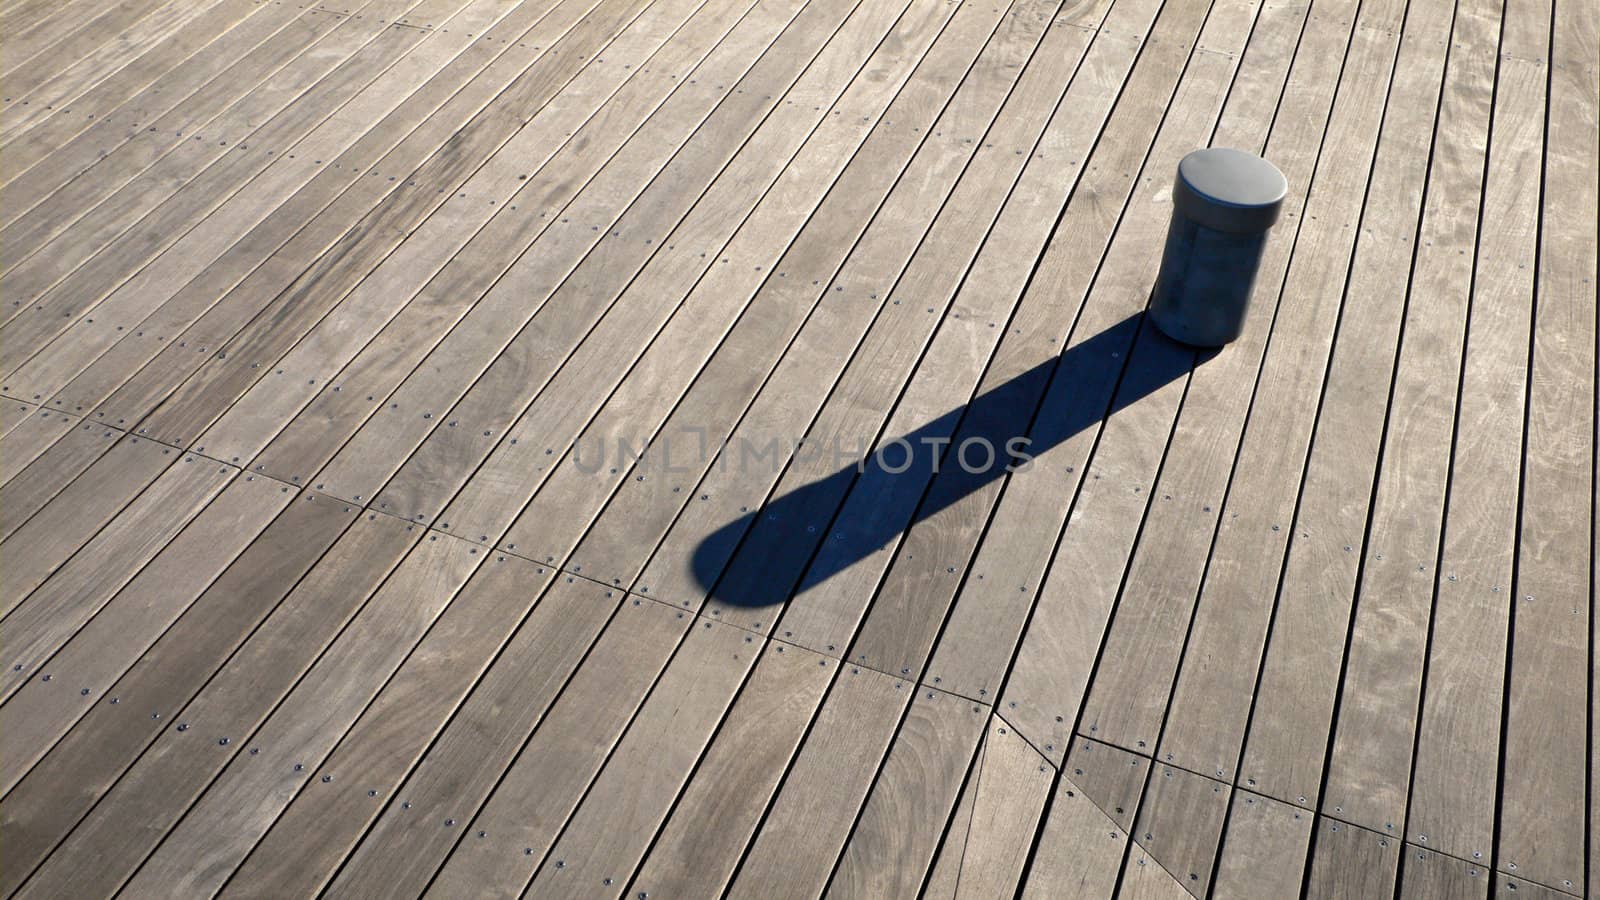 small post and it's long shadow on the wooden deck background